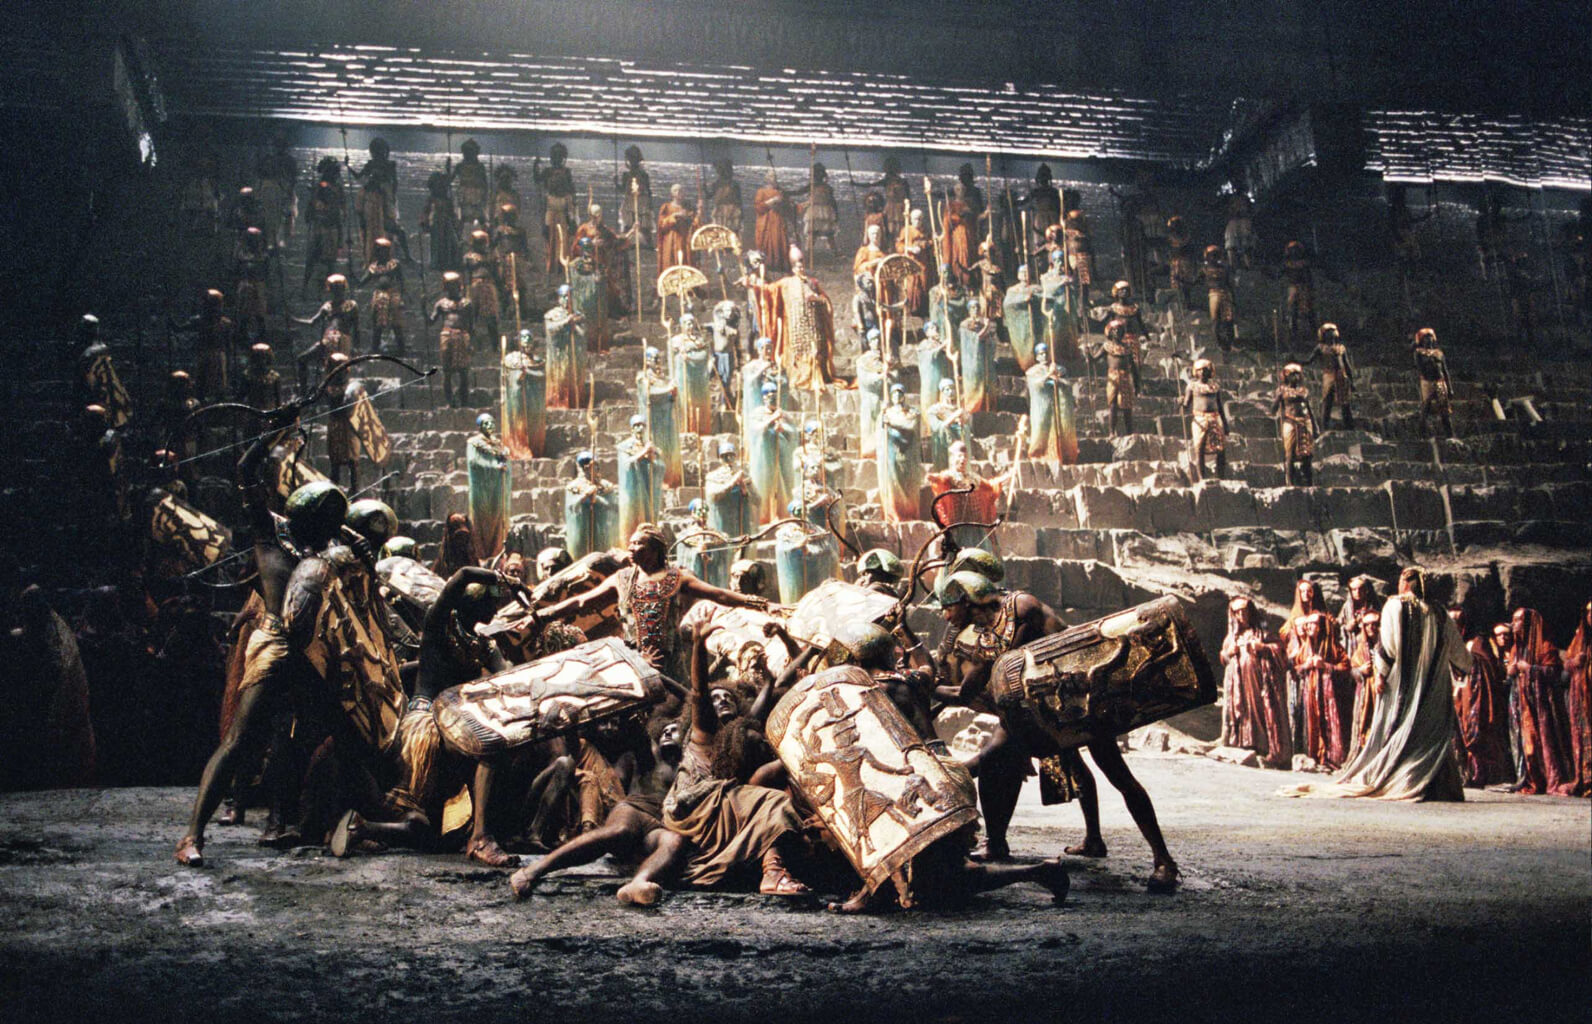 ‘Aida’, by Giuseppe Verdi, is one of the most monumental and emblematic productions of the Real.